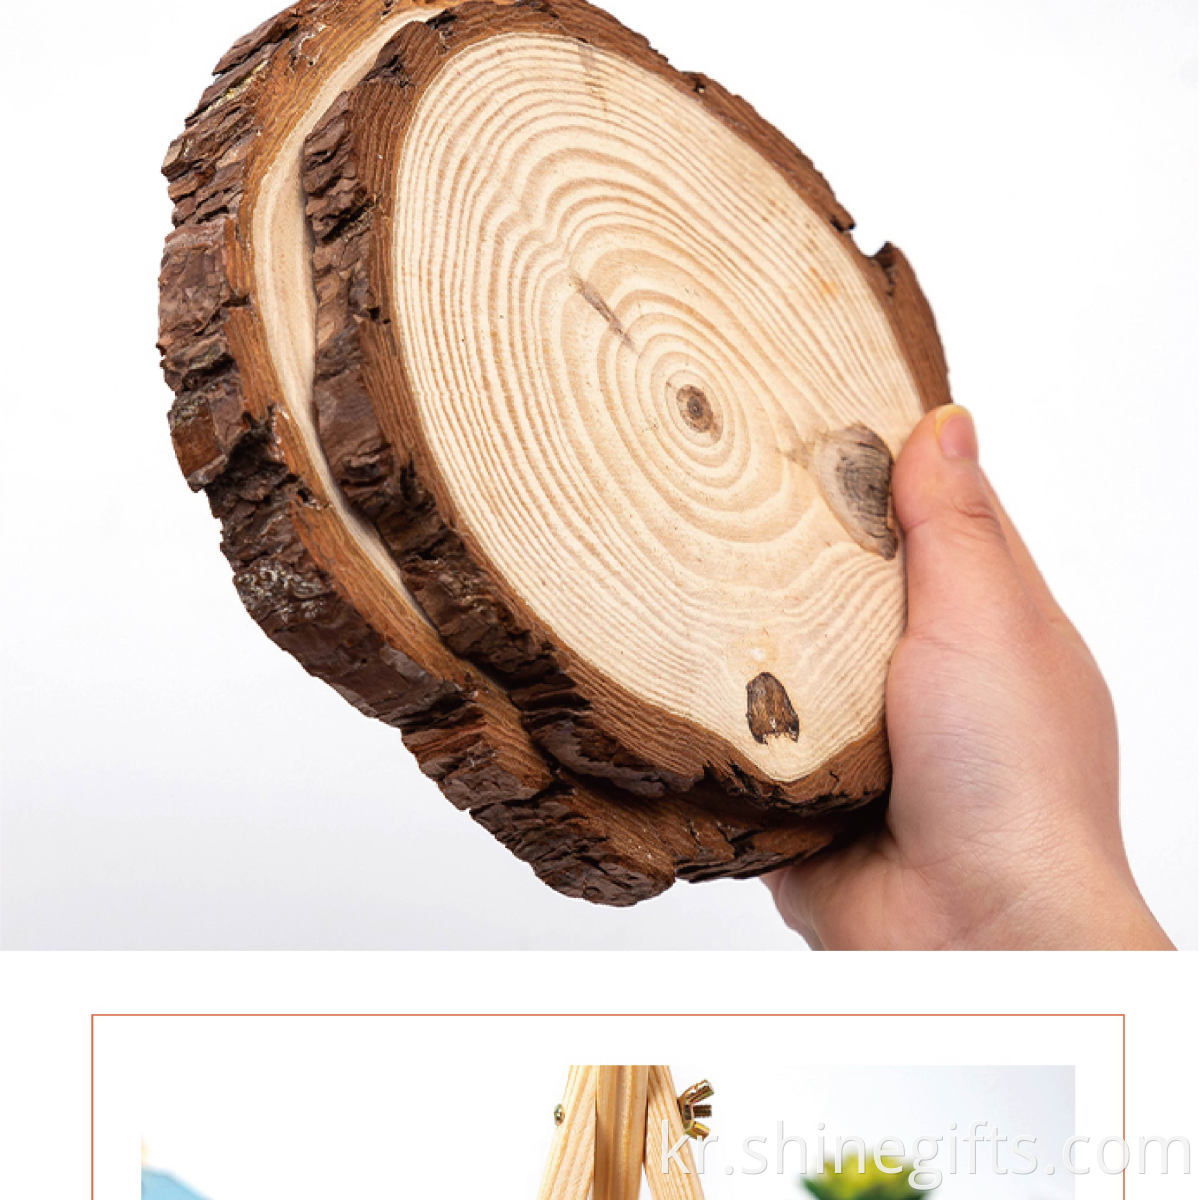 Pretty Design Kids Toy Set Craft Painting Round Natural Pine Wooden Slices Kids Painting